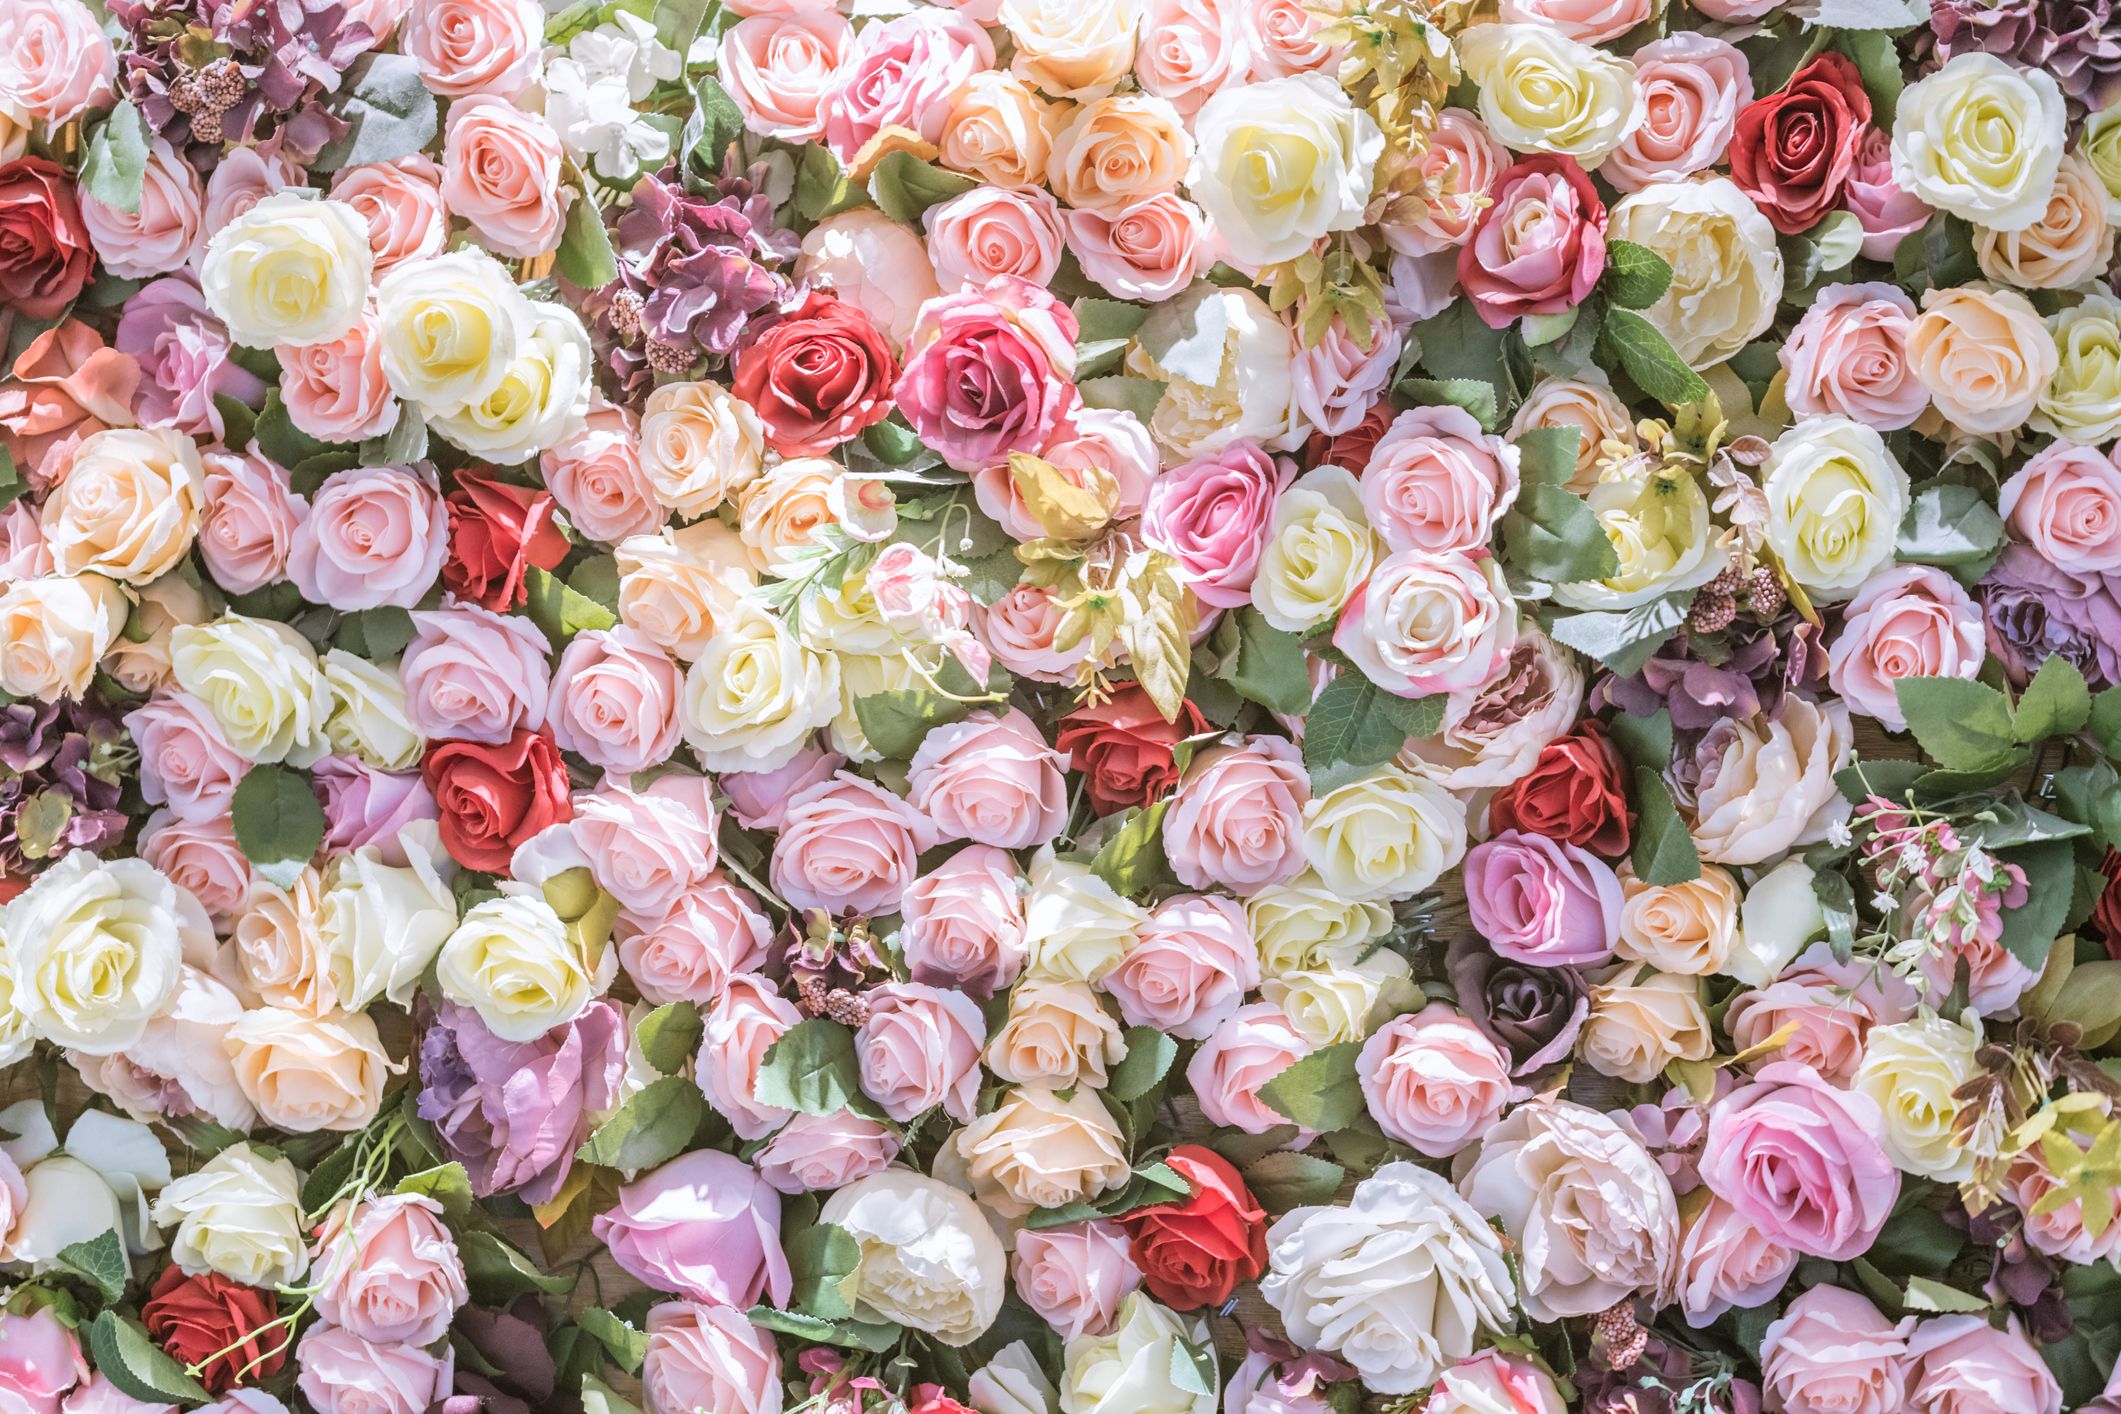 17 Rose Color Meanings Explained - The Best Rose Colors